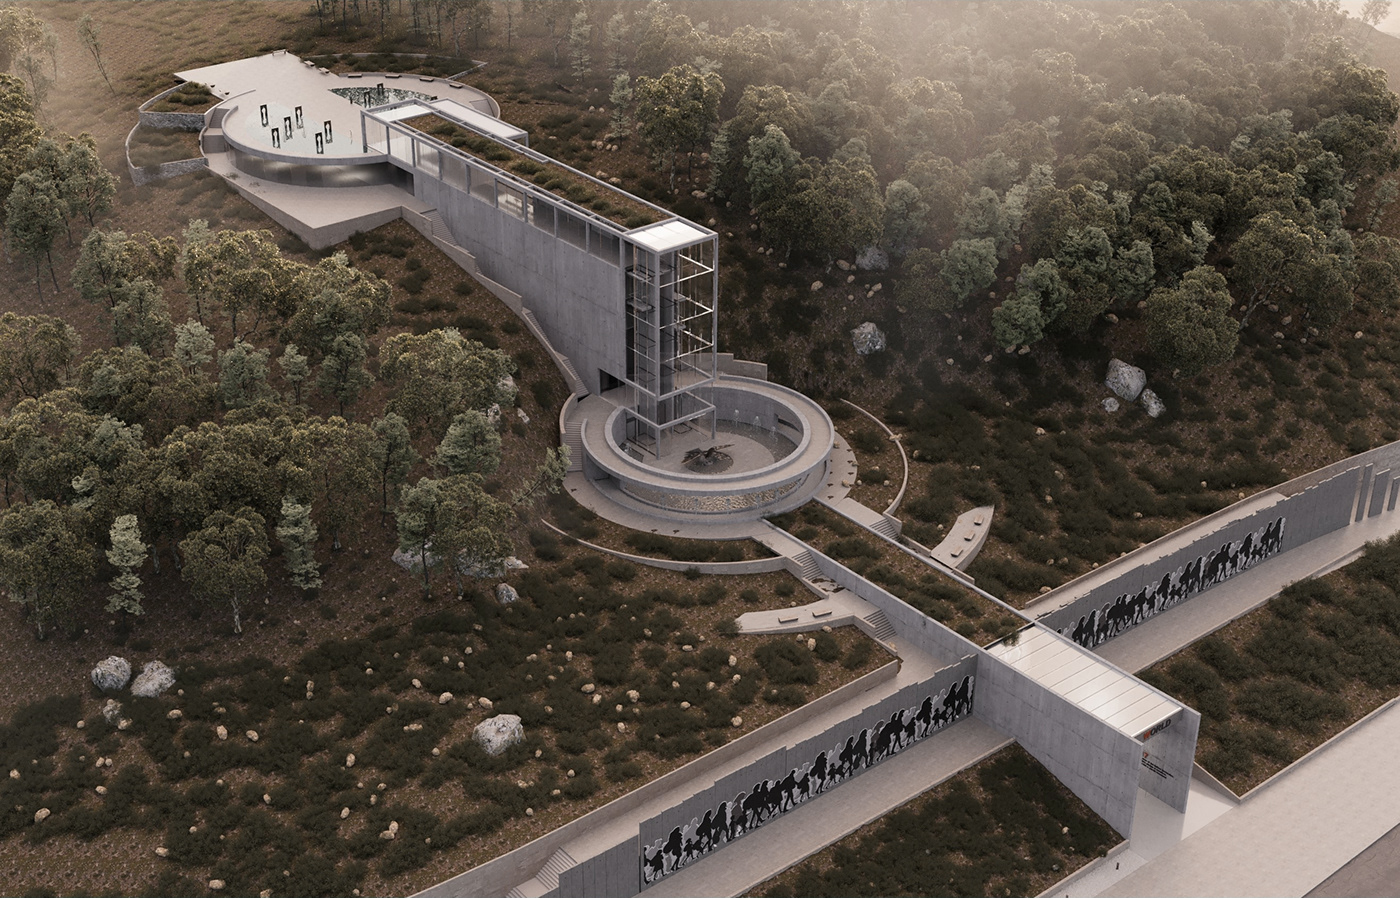 graduation project architecture museum palestine 3ds max Memorial photoshop topography freedom